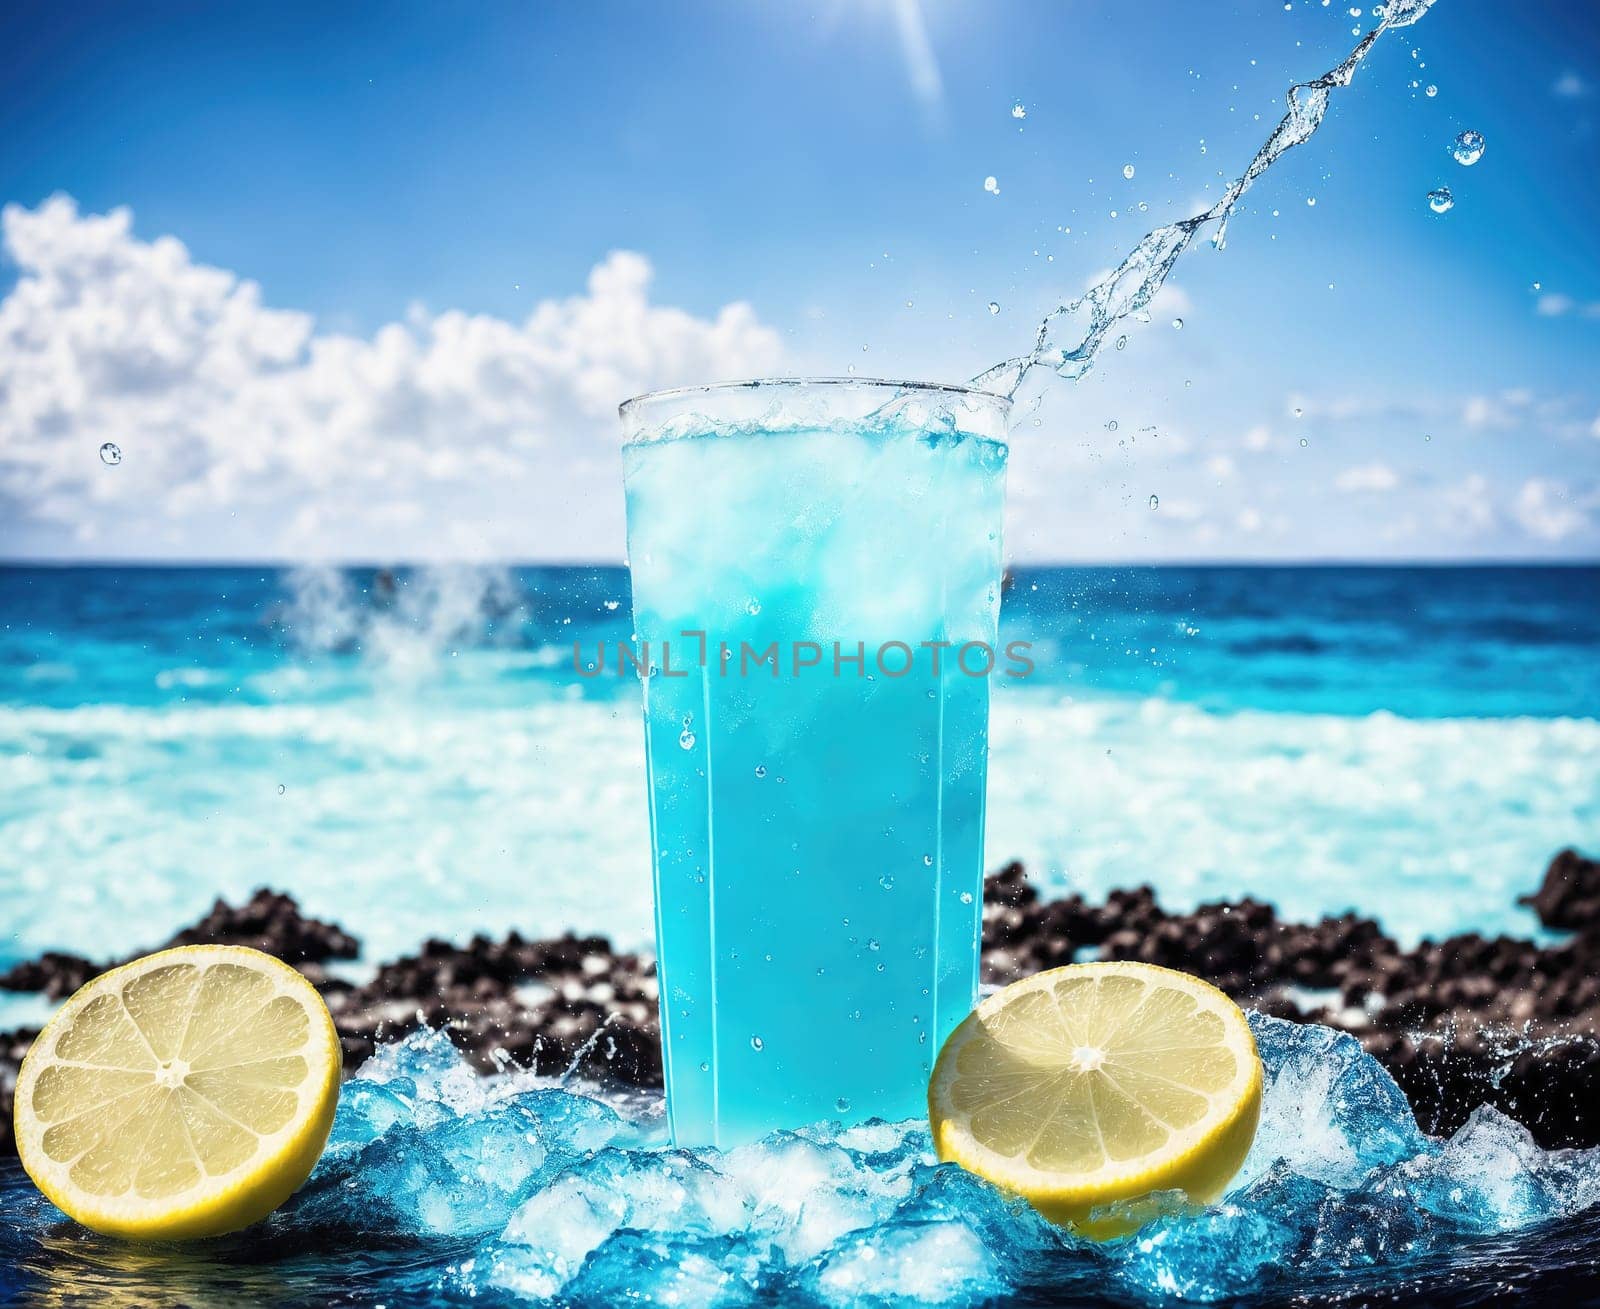 The image shows a glass of blue liquid with lemon slices on the side, sitting on a rocky beach with clear blue water in the background.